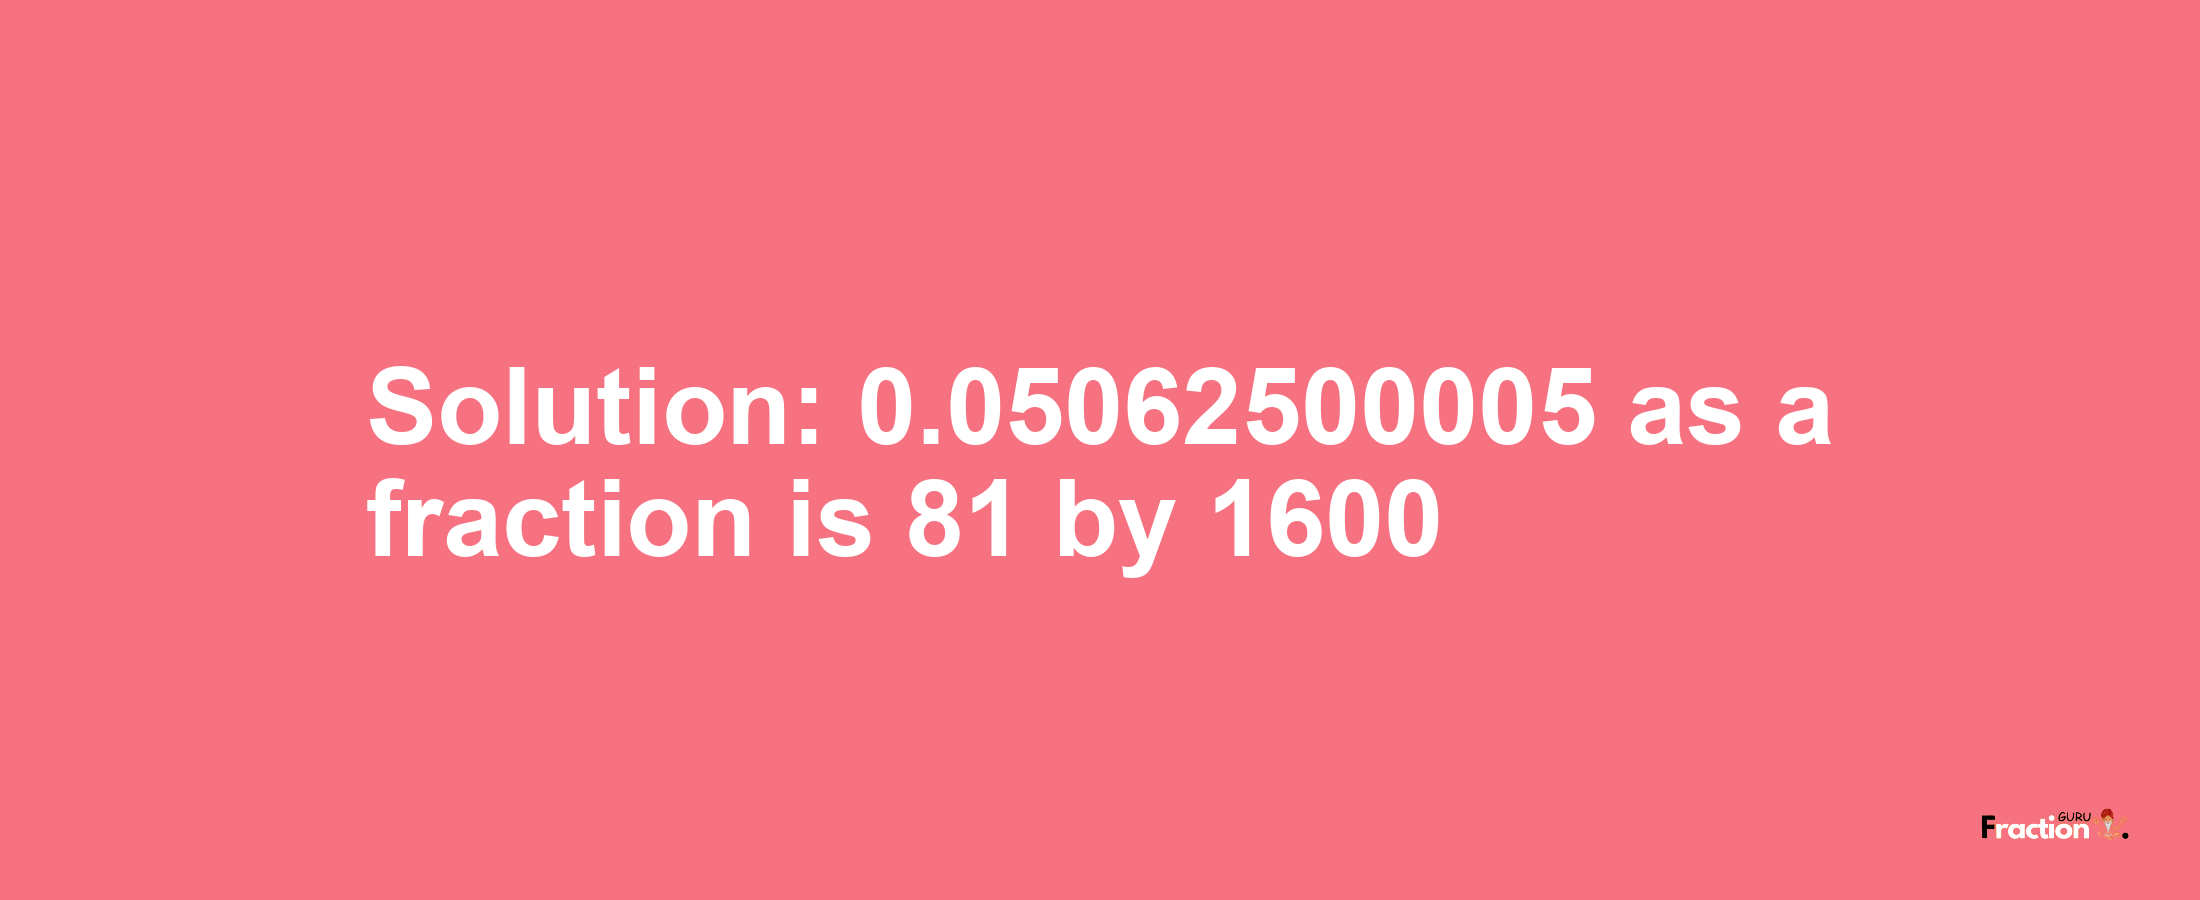 Solution:0.05062500005 as a fraction is 81/1600